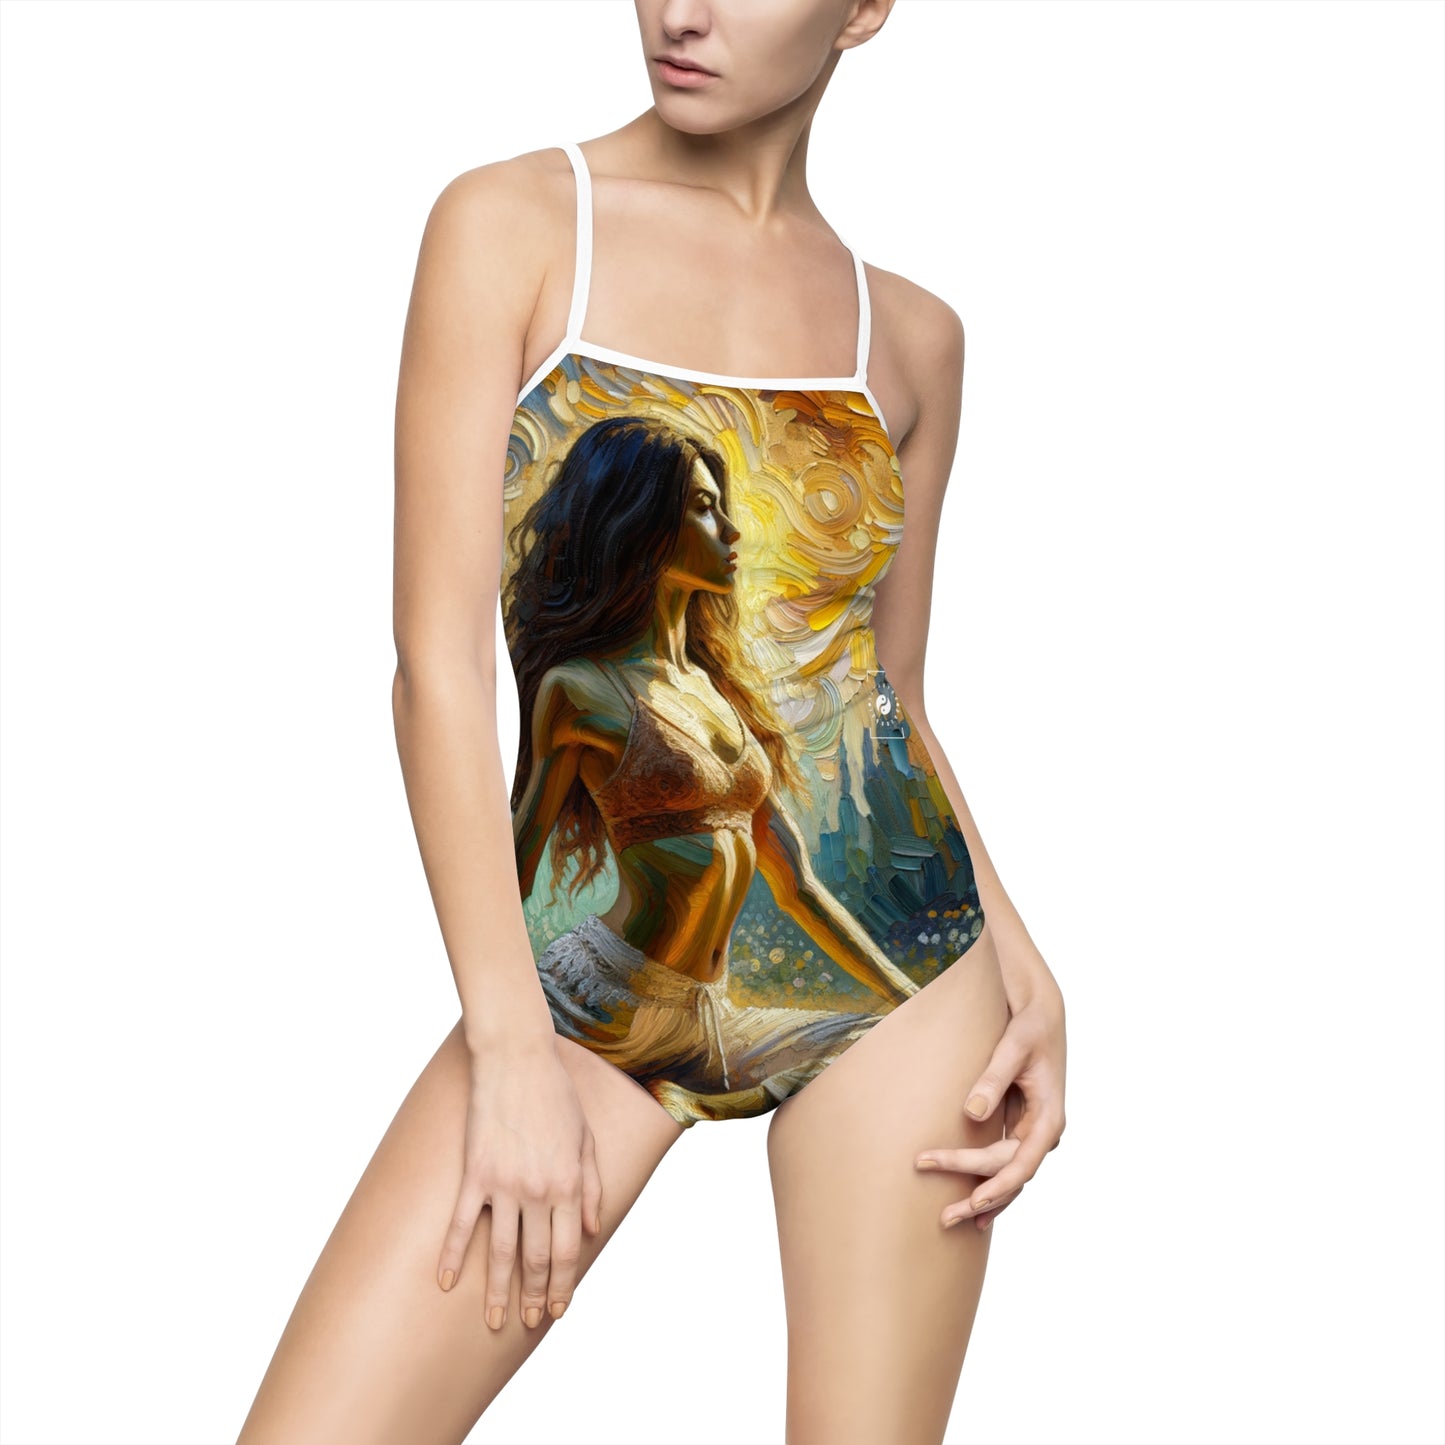 "Golden Warrior: A Tranquil Harmony" - Openback Swimsuit